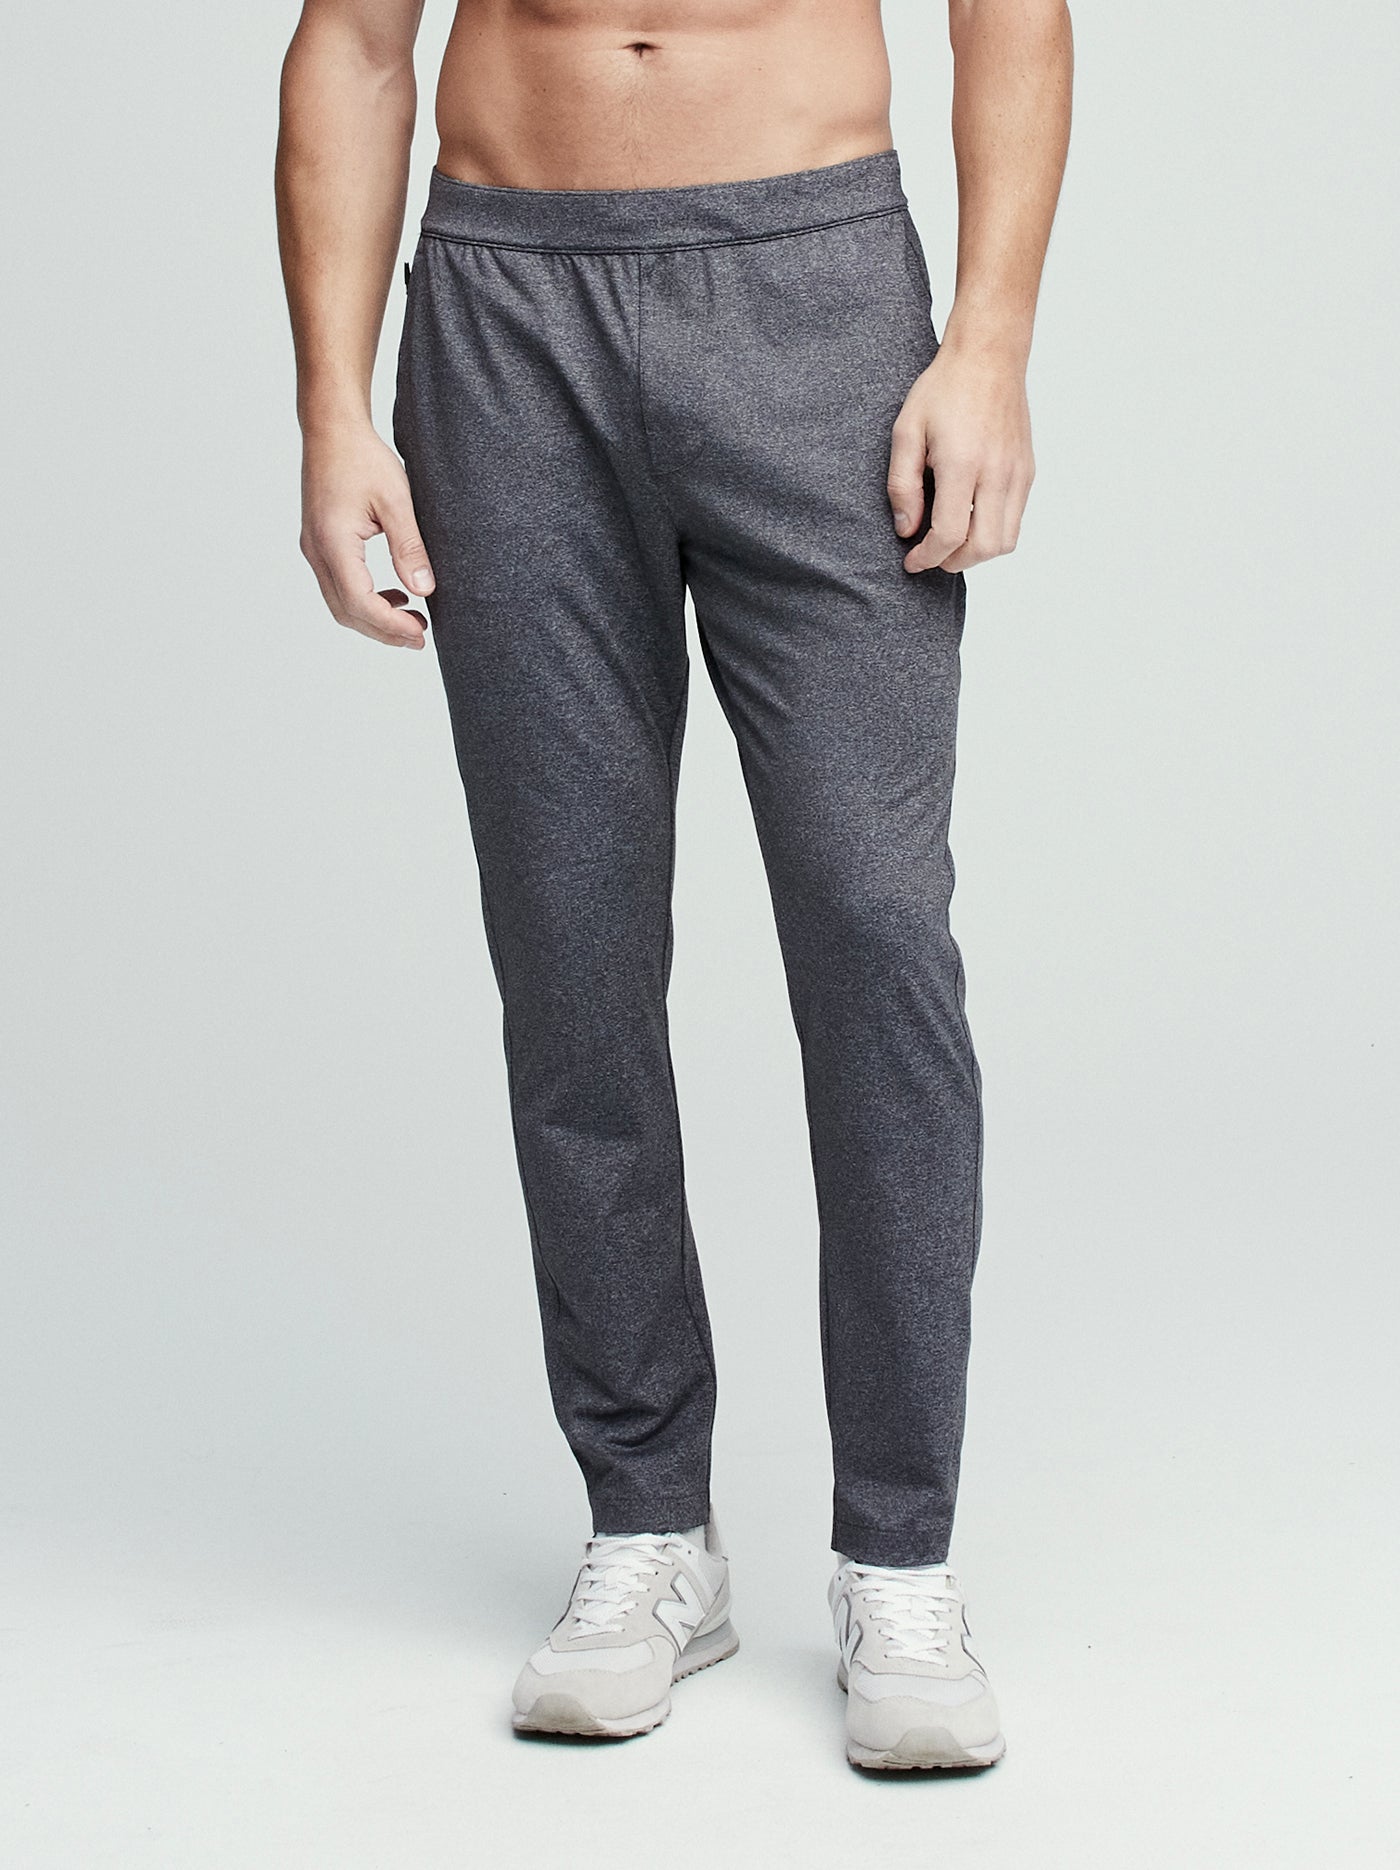 4F Skinny Workout Pants in Light Grey